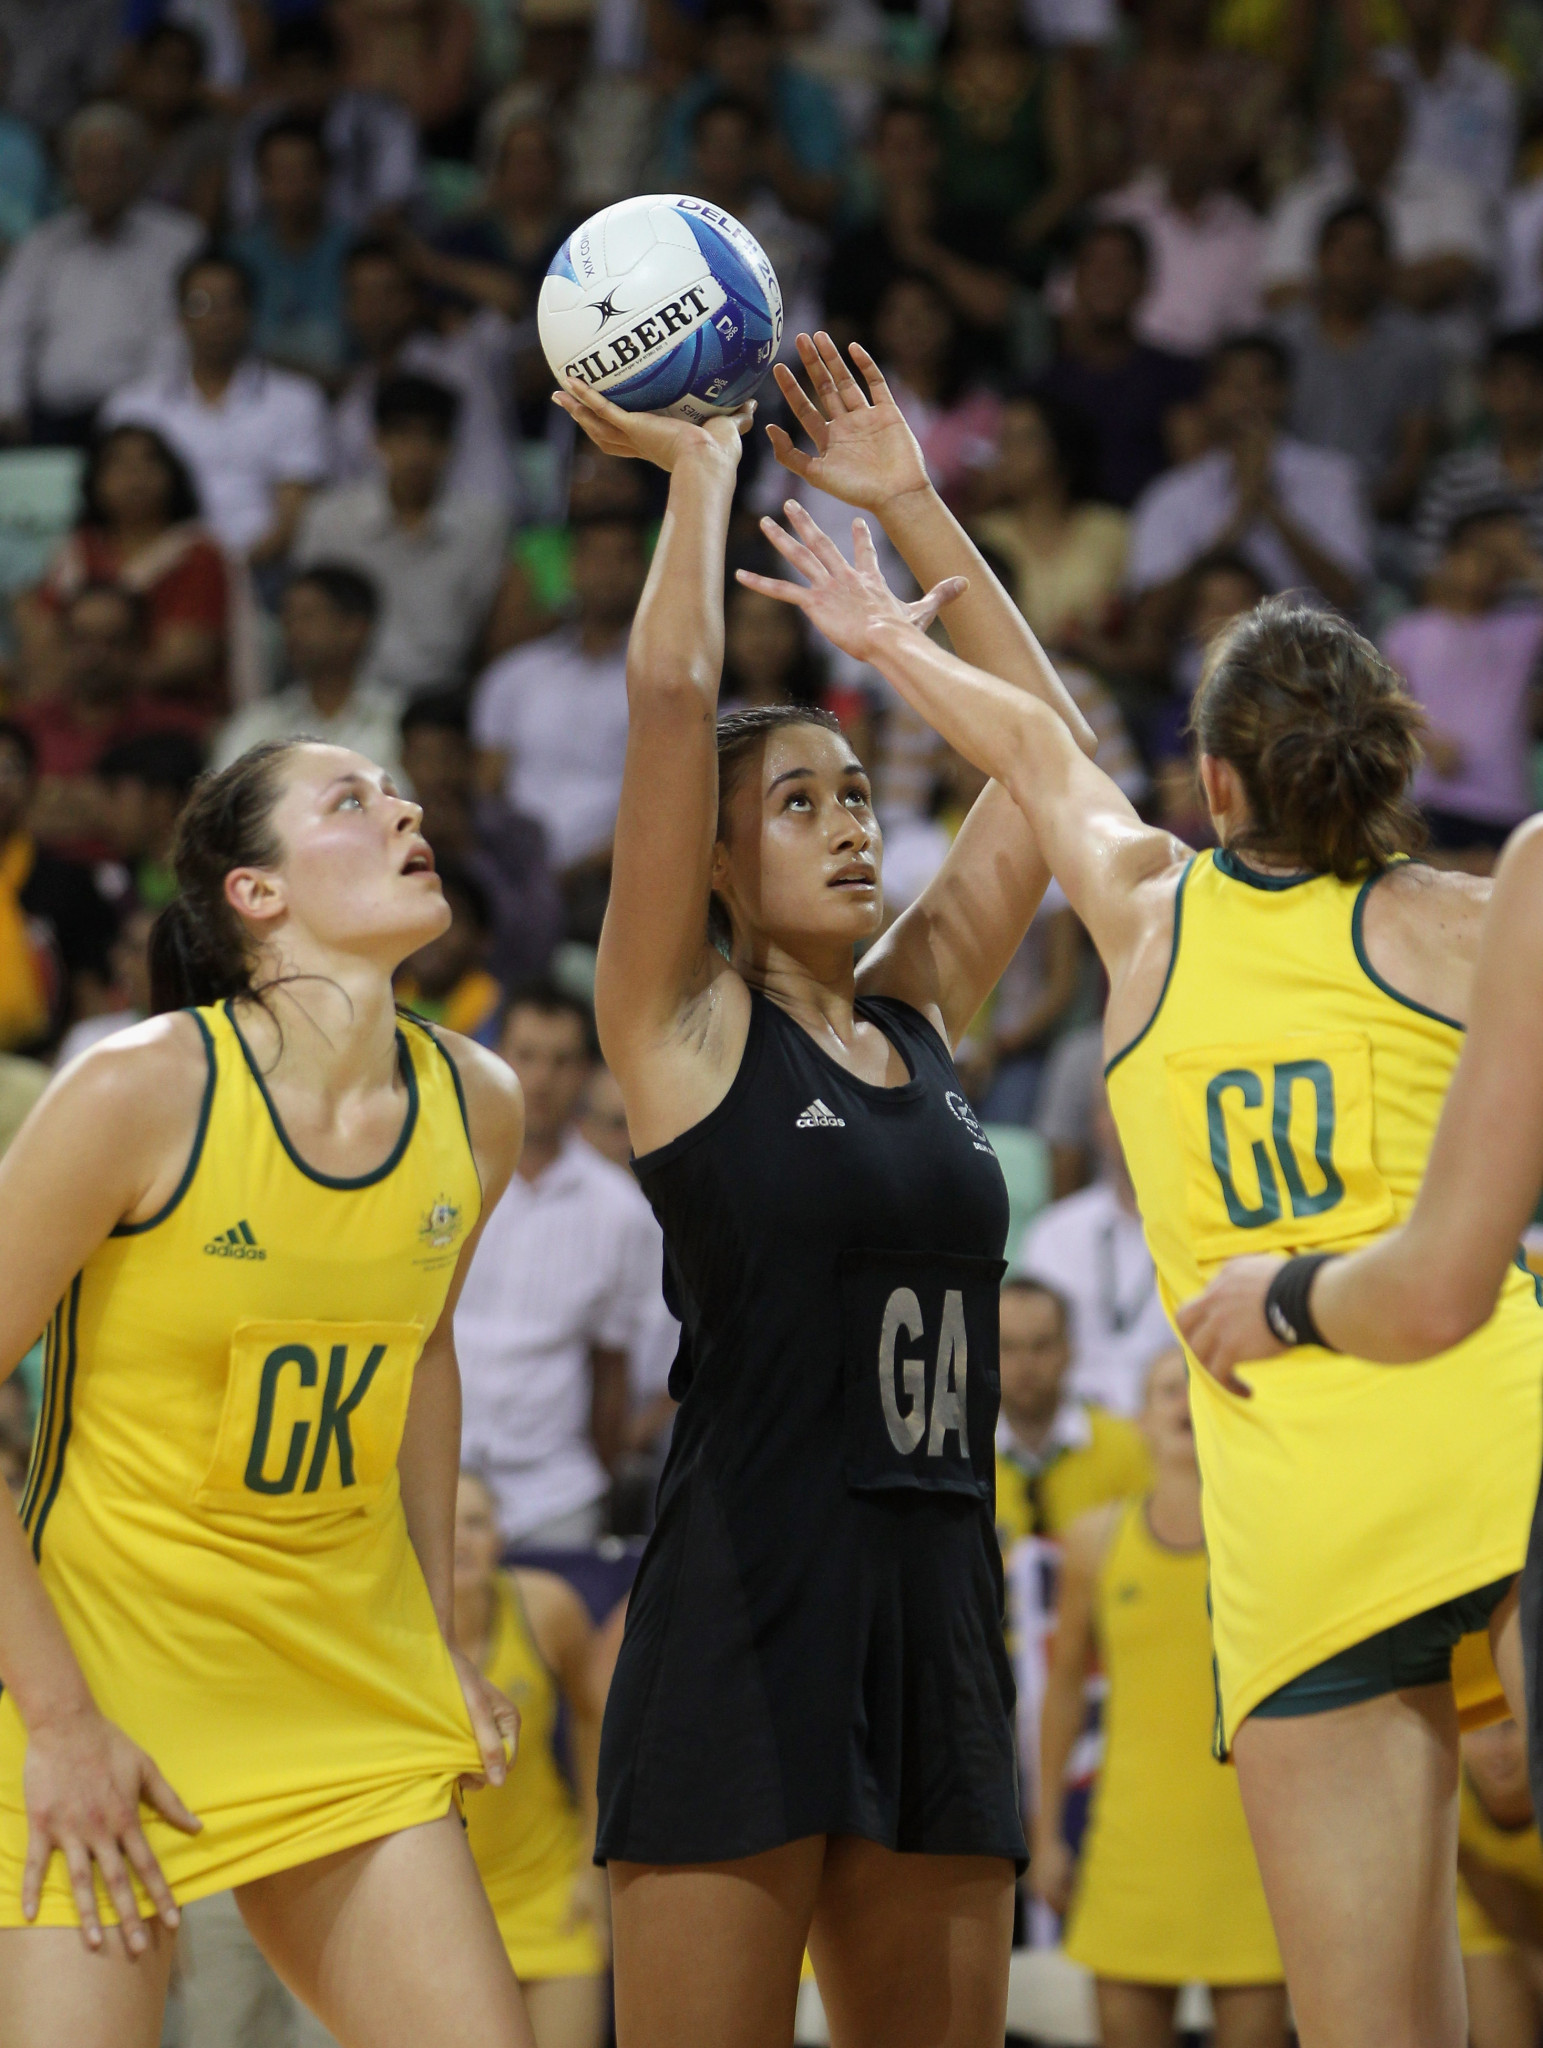 Maria Folau won two Commonwealth Games gold medals, including at Delhi 2010, when New Zealand beat Australia in the final with her scoring the winning goal in extra-time ©Getty Images